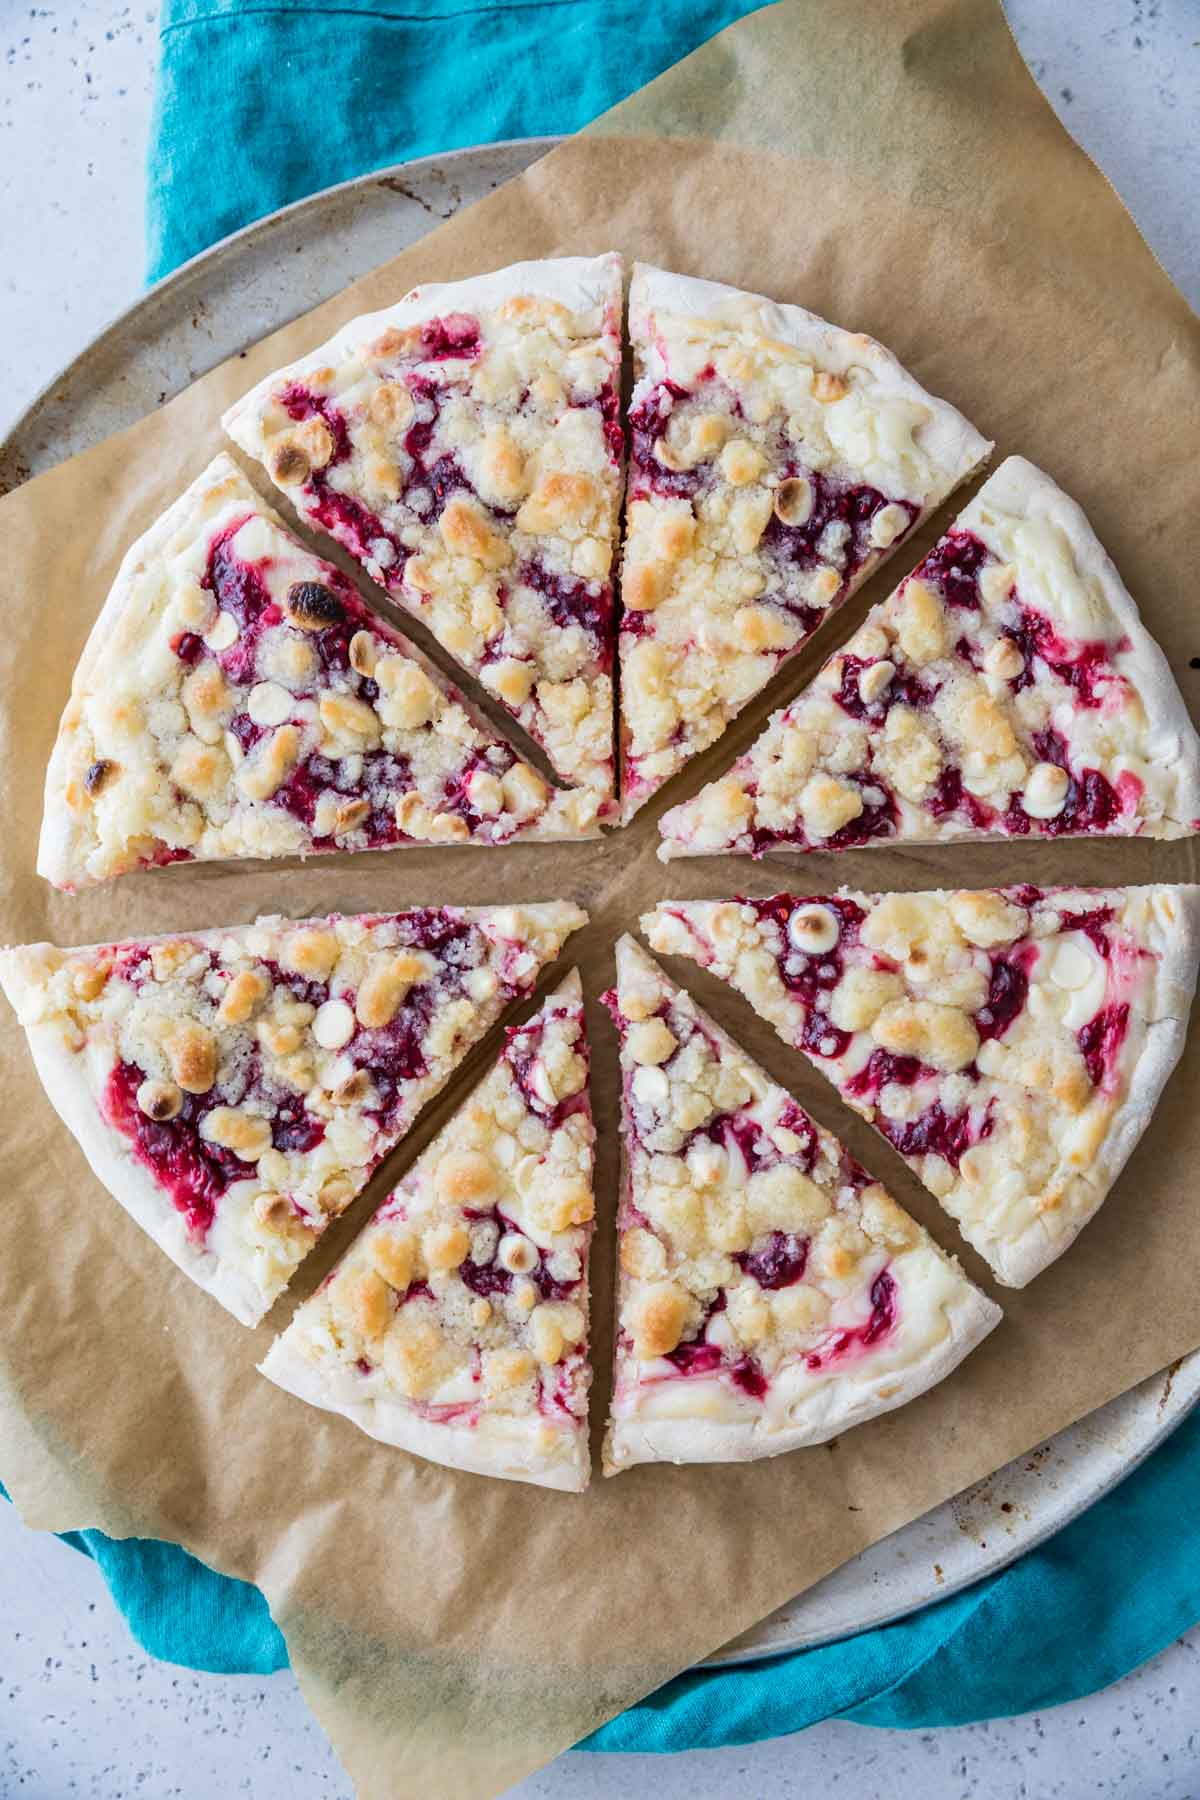 Overhead view of a raspberry pizza that's been cut into 8 slices.